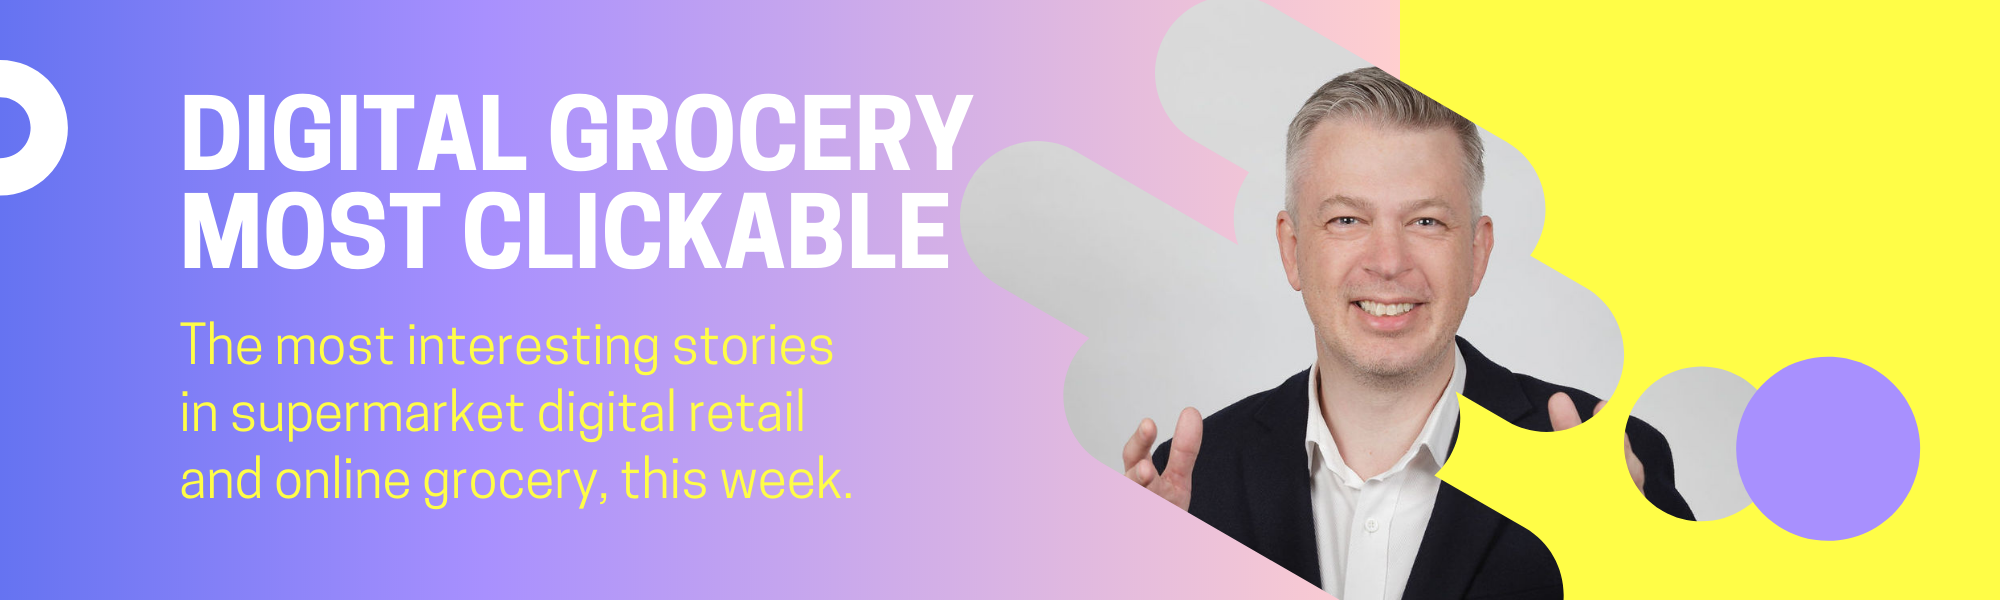 Digital Grocery Most Clickable Stories: Week 5